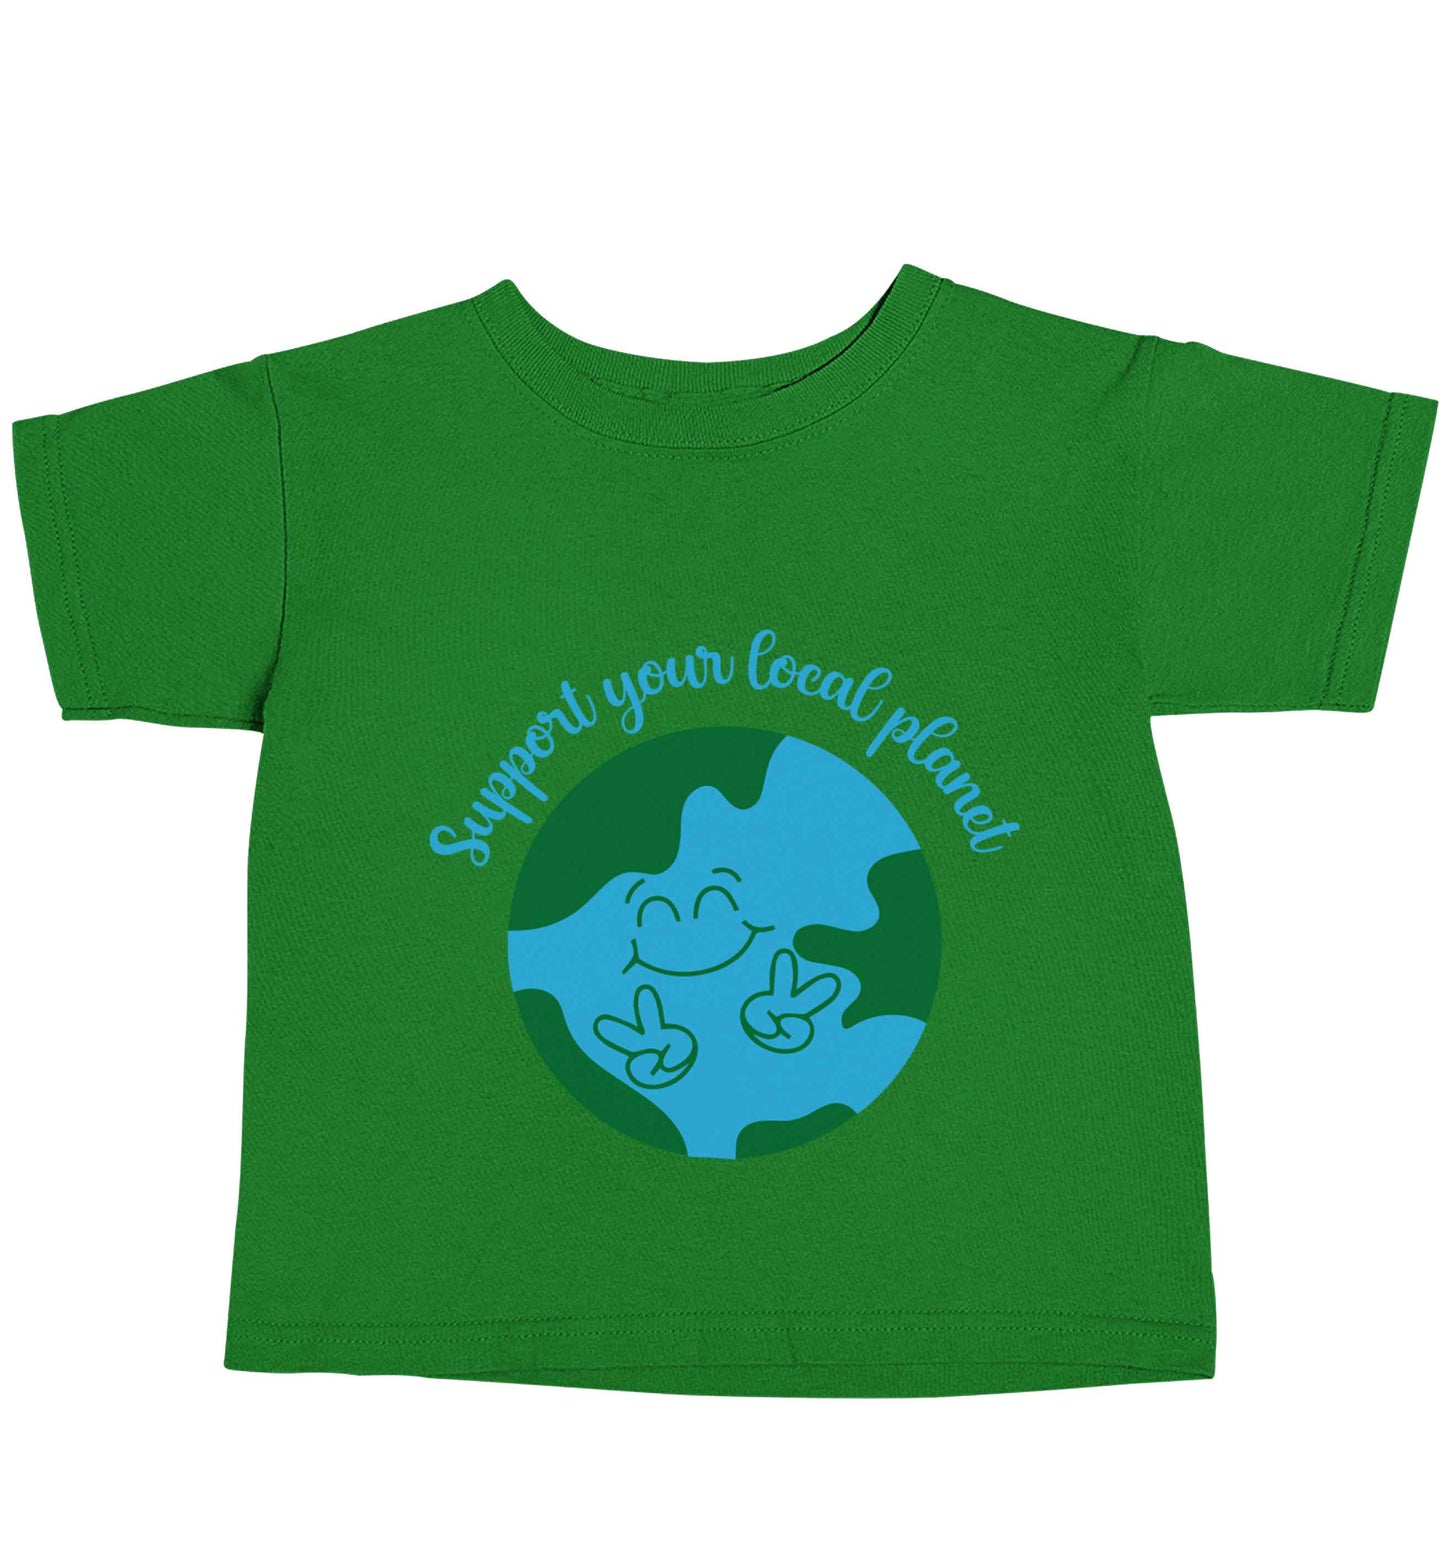 Support your local planet green baby toddler Tshirt 2 Years